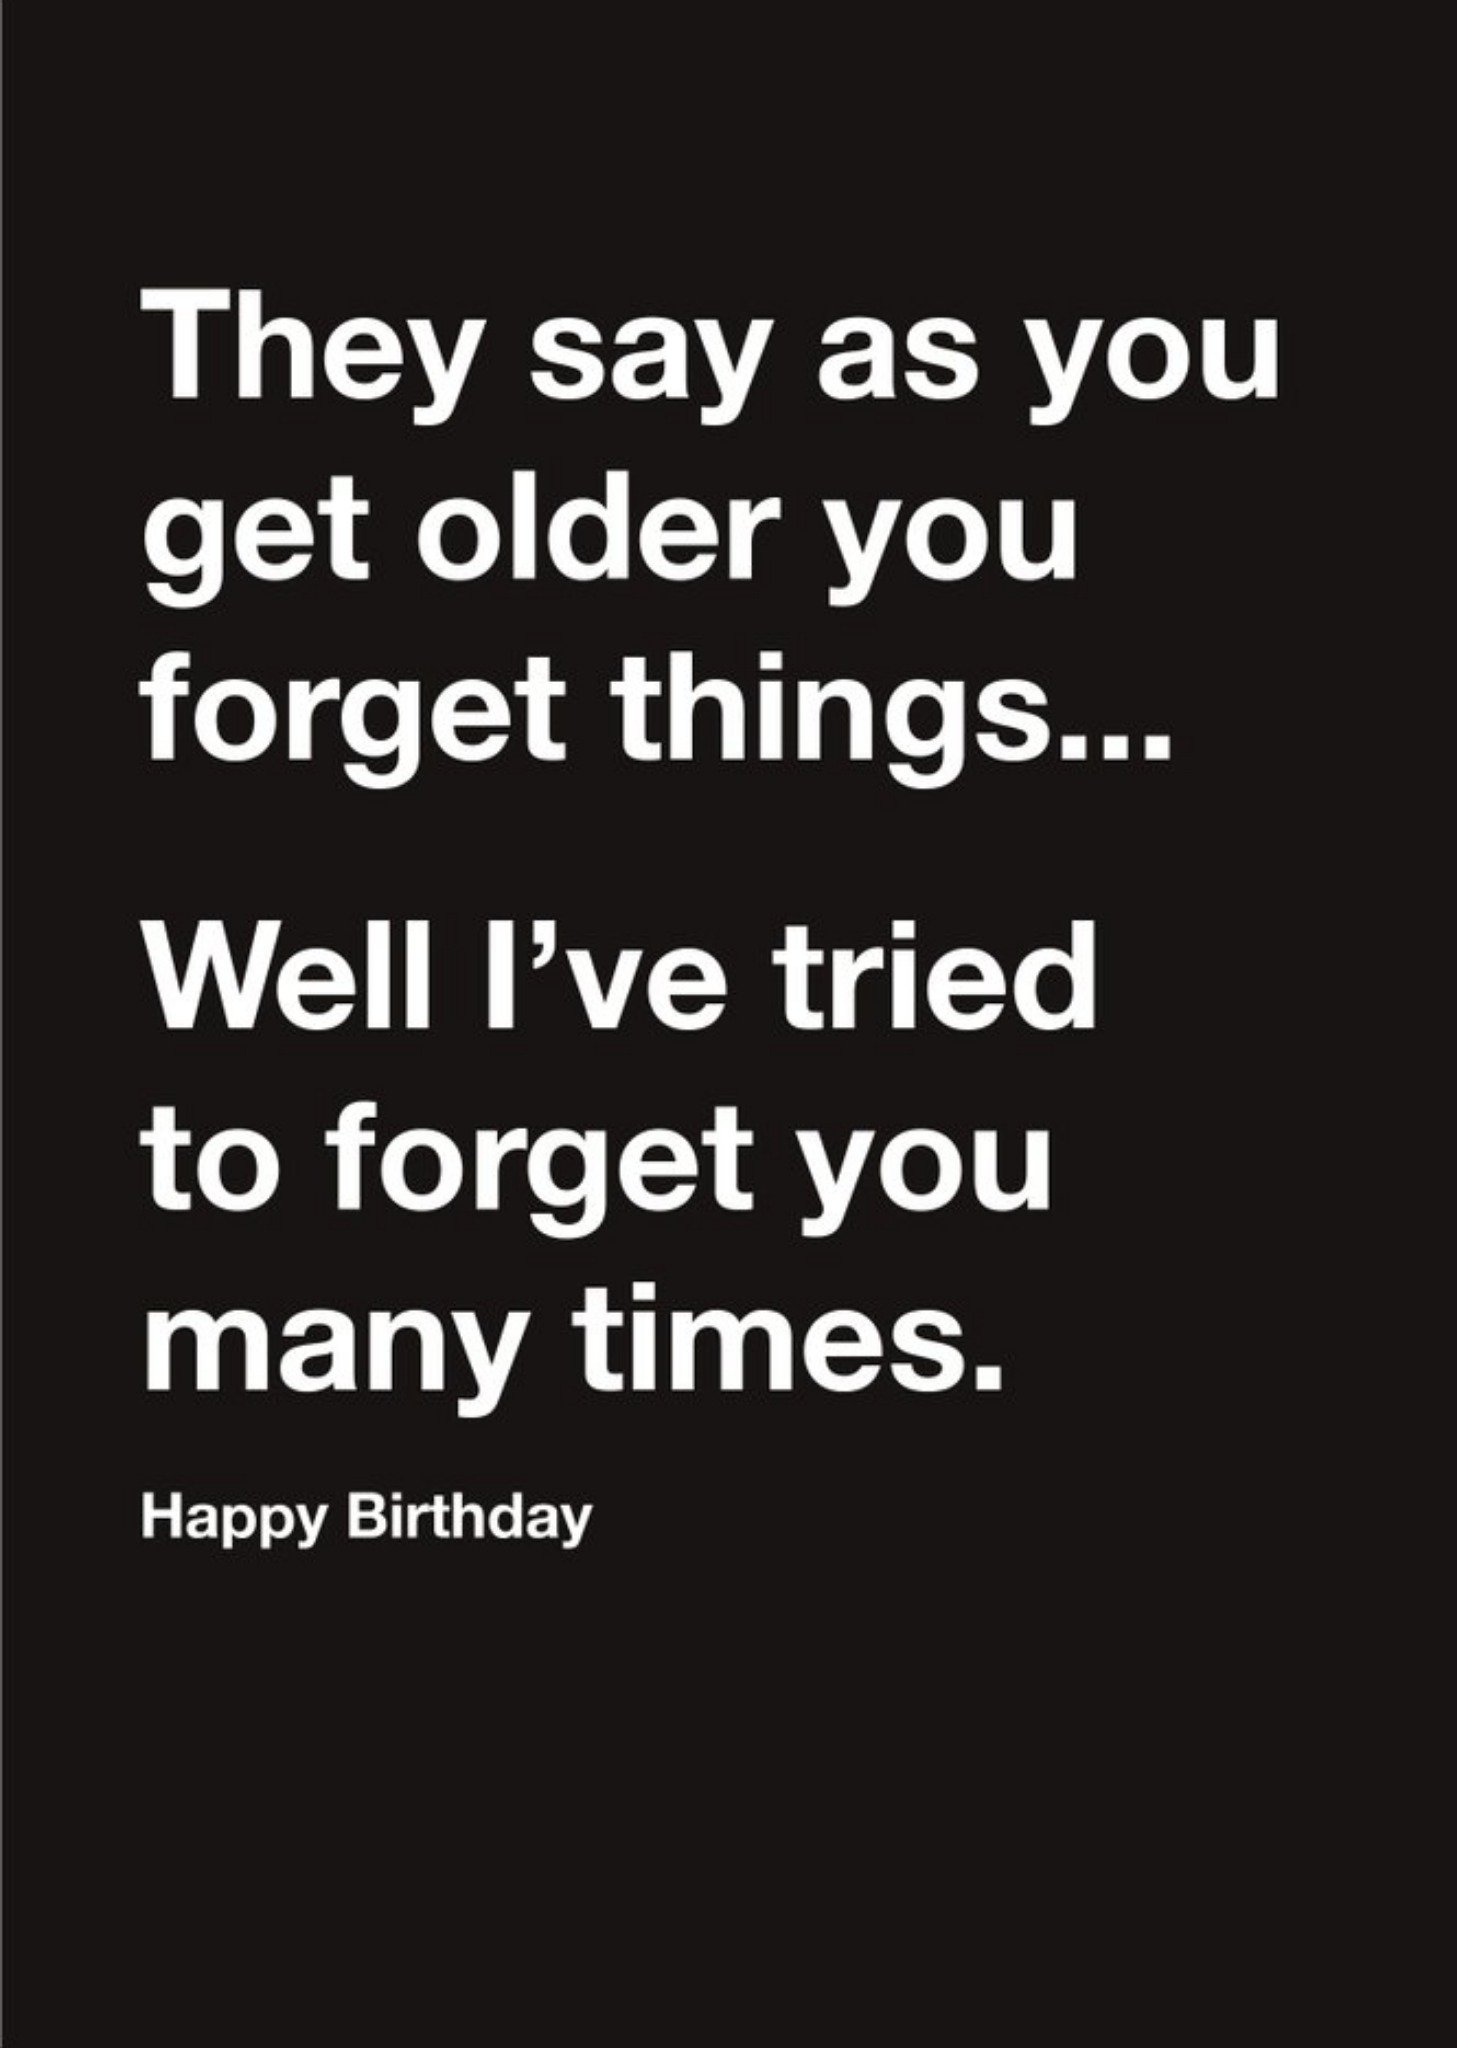 Moonpig Carte Blanche Forget Things Old Age Happy Birthday Card Ecard